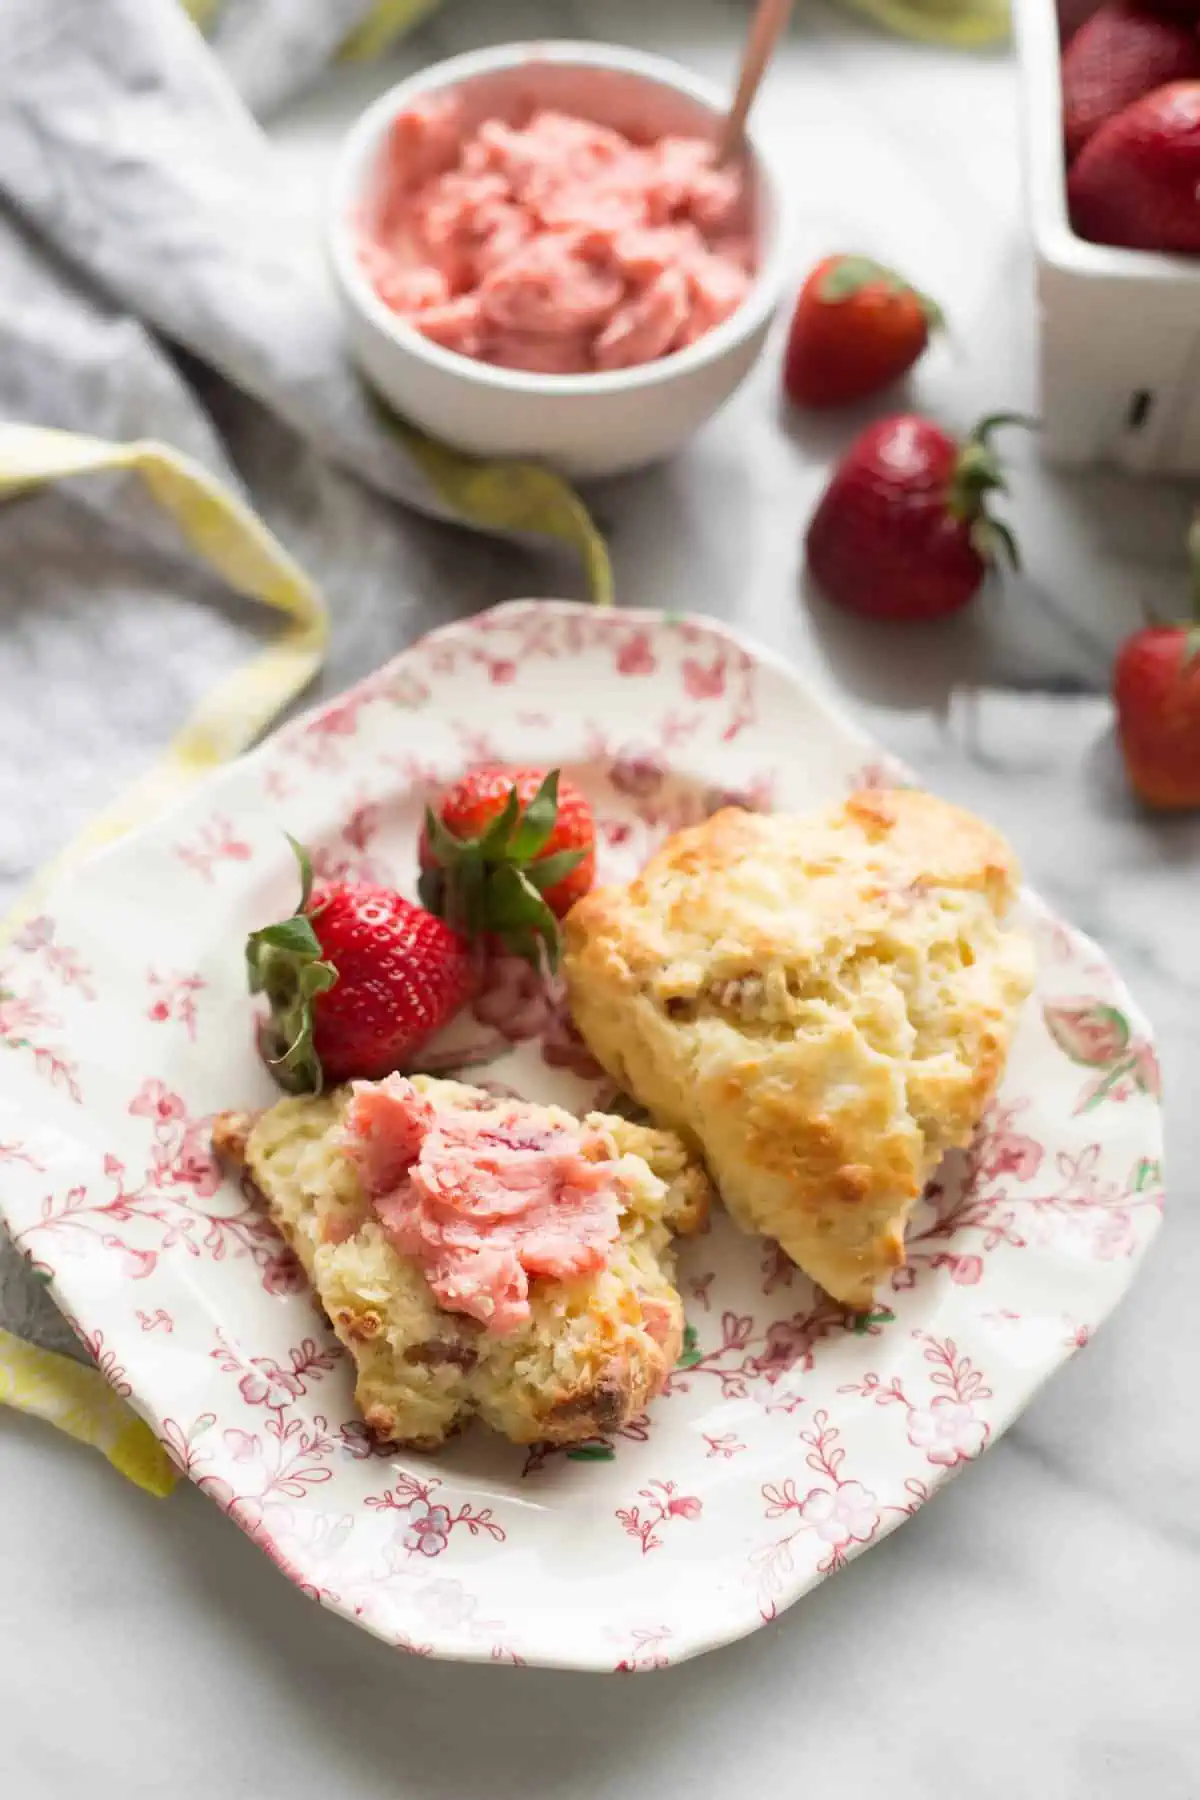 Square floral plate with two scones and fresh whole strawberries.